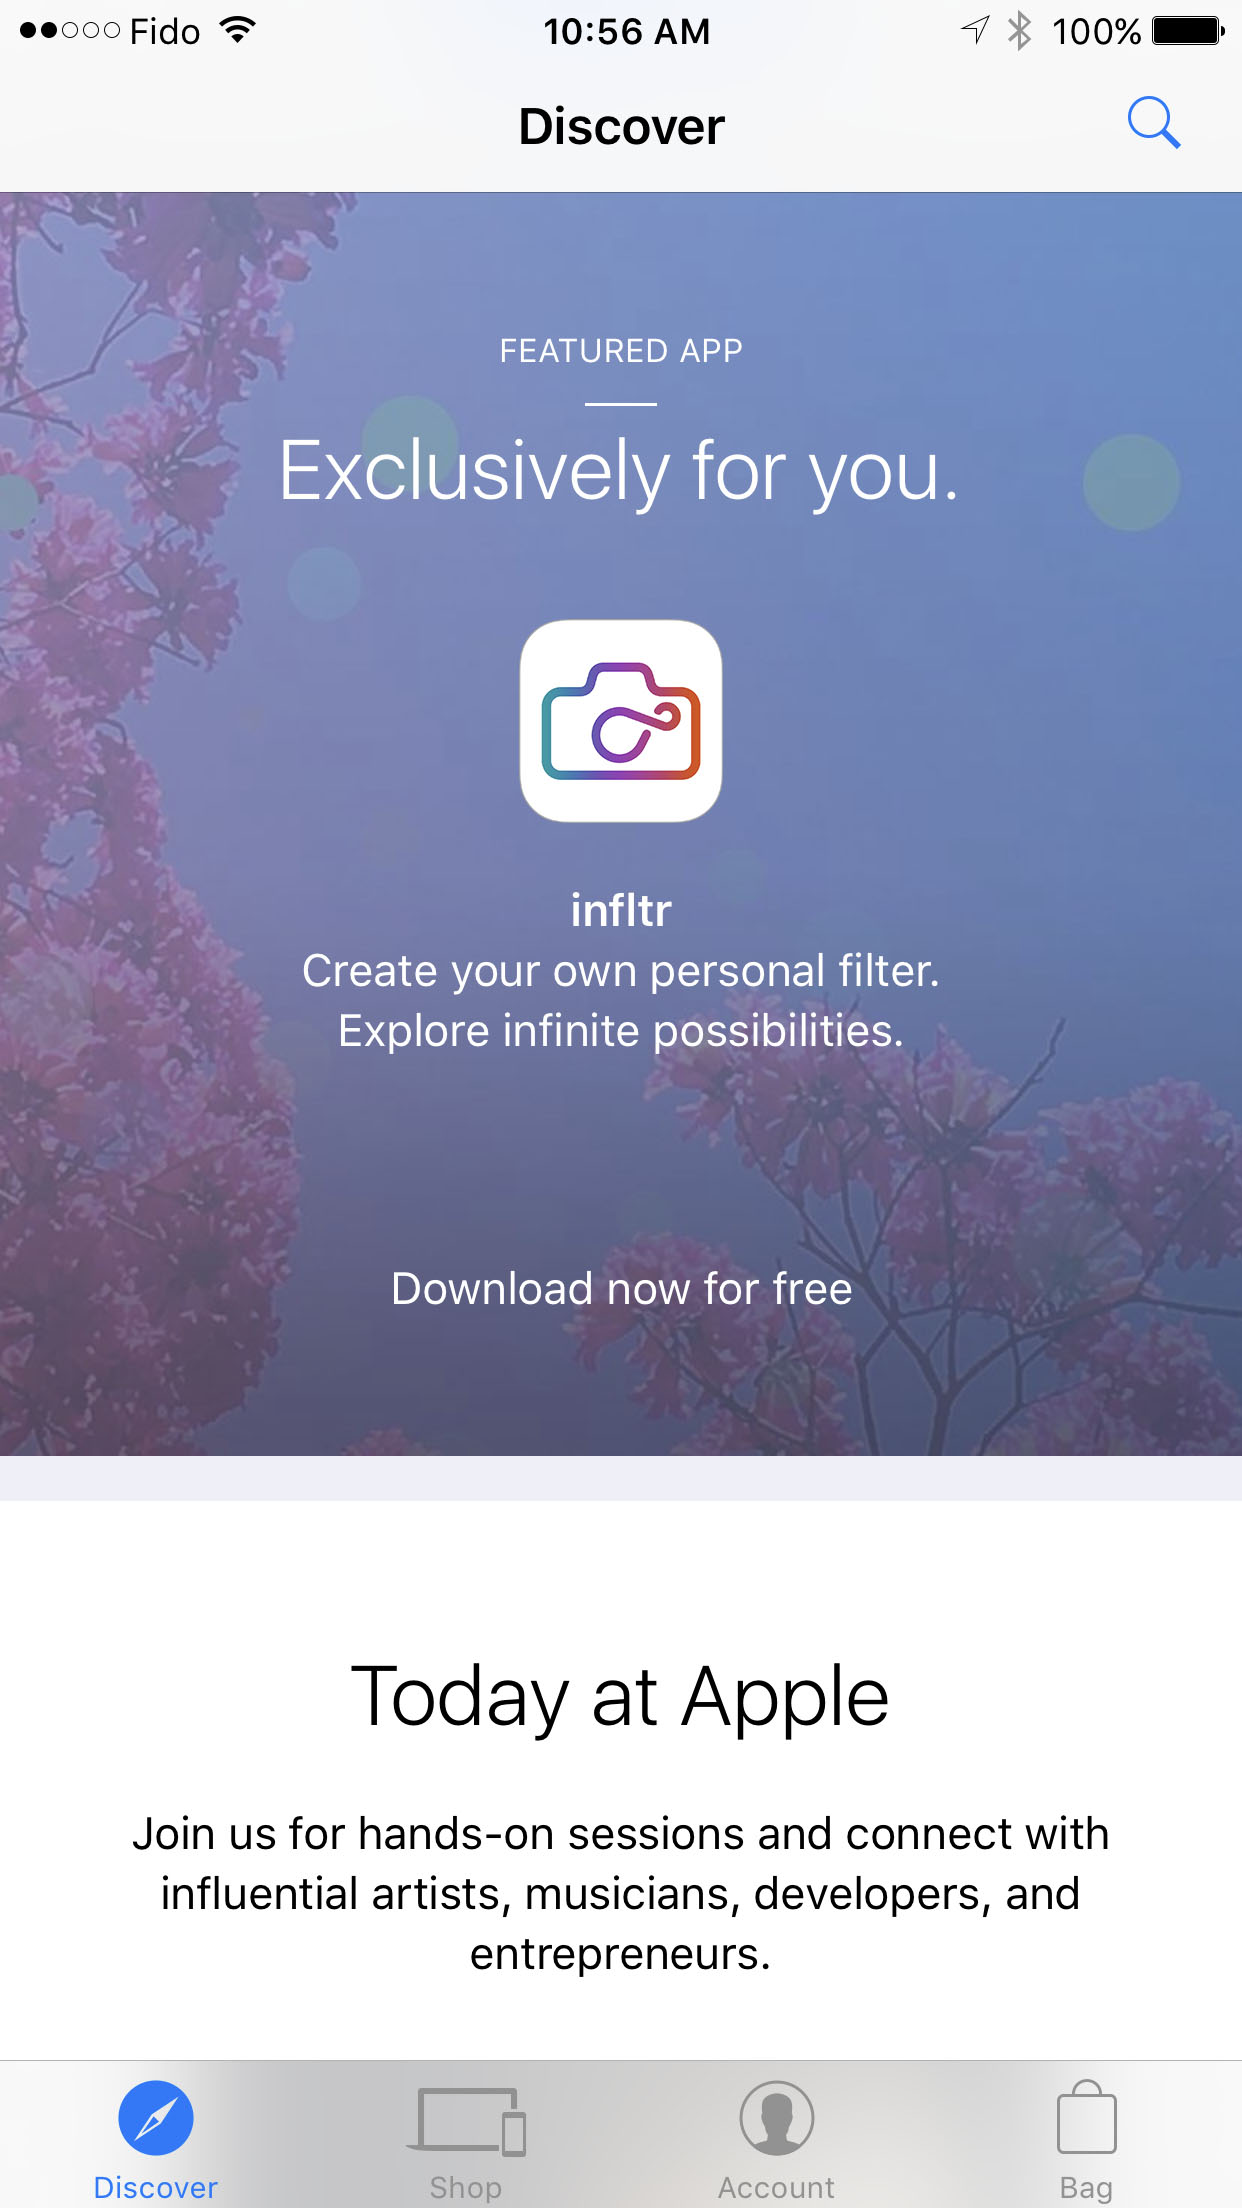 Apple Offers infltr Photo App as a Free Download via the Apple Store App